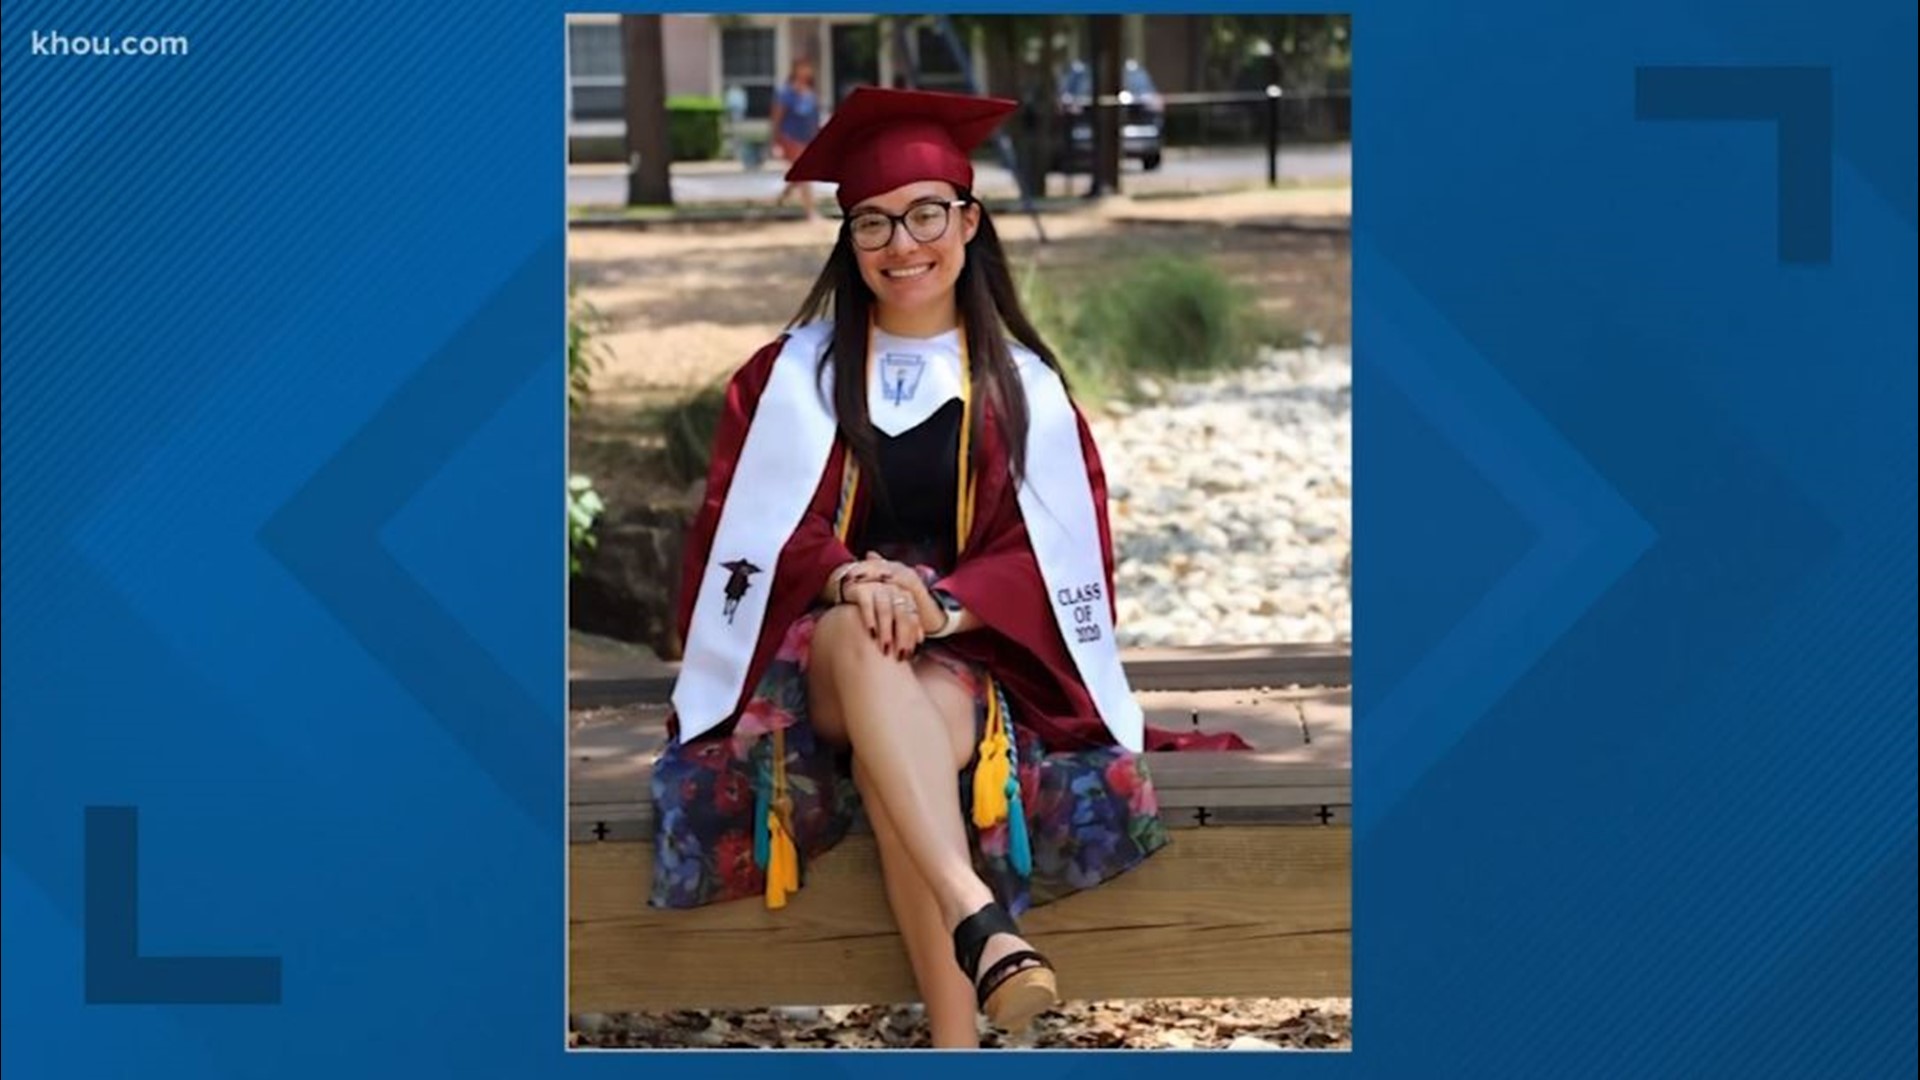 A Yes Preparatory High School graduate got a scholarship to attend Colby College in Maine all thanks to the Posse Foundation Houston - a scholarship organization.